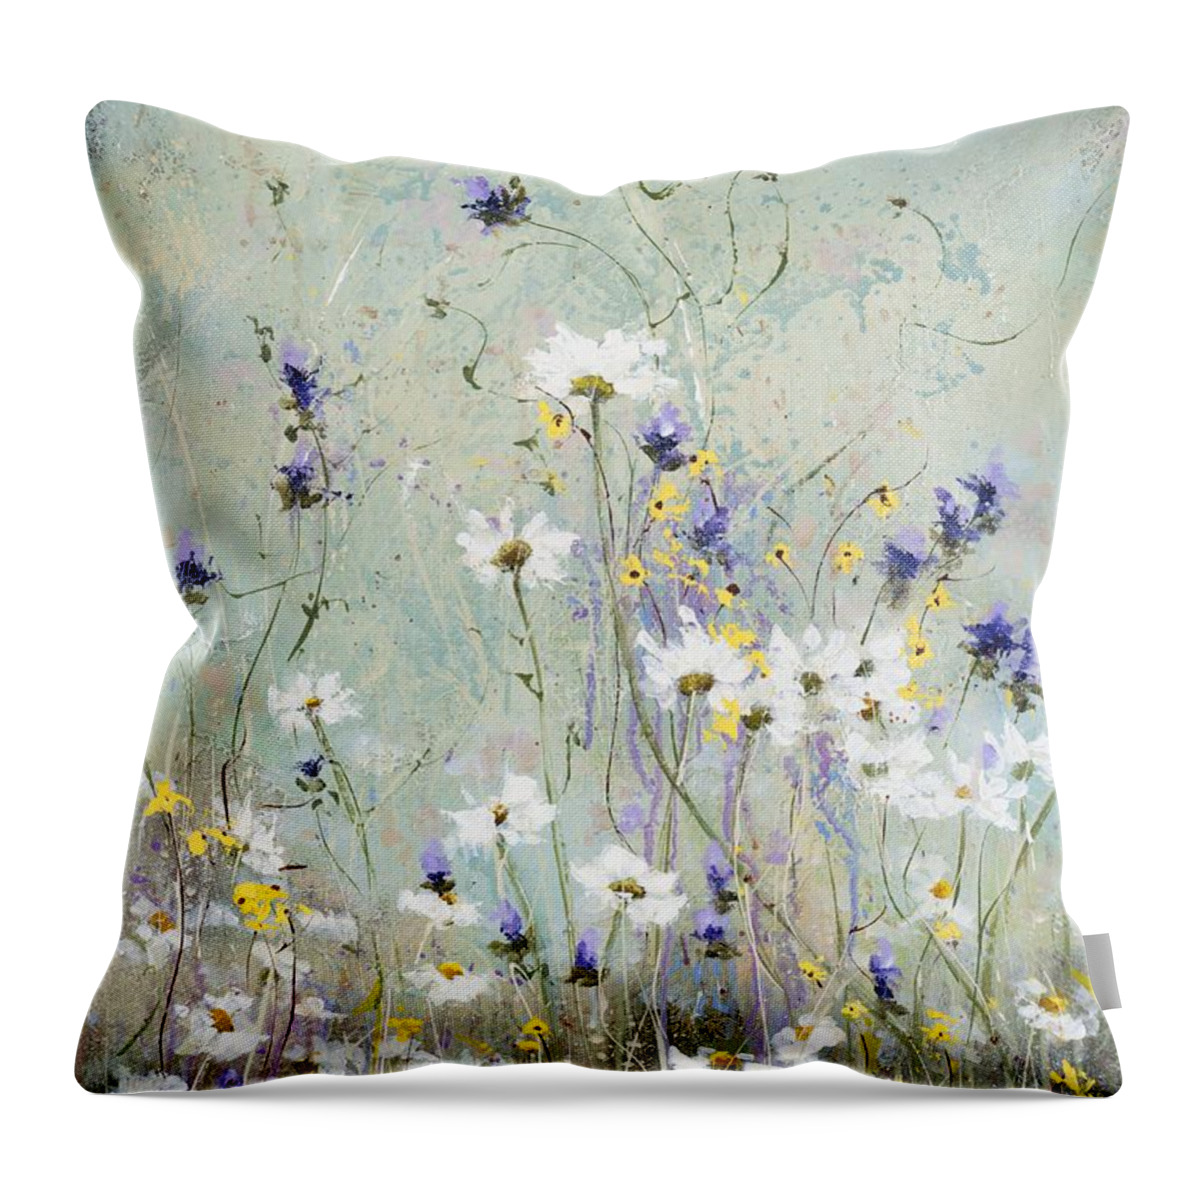 Flowers Throw Pillow featuring the painting Shabby Ten by Laura Lee Zanghetti